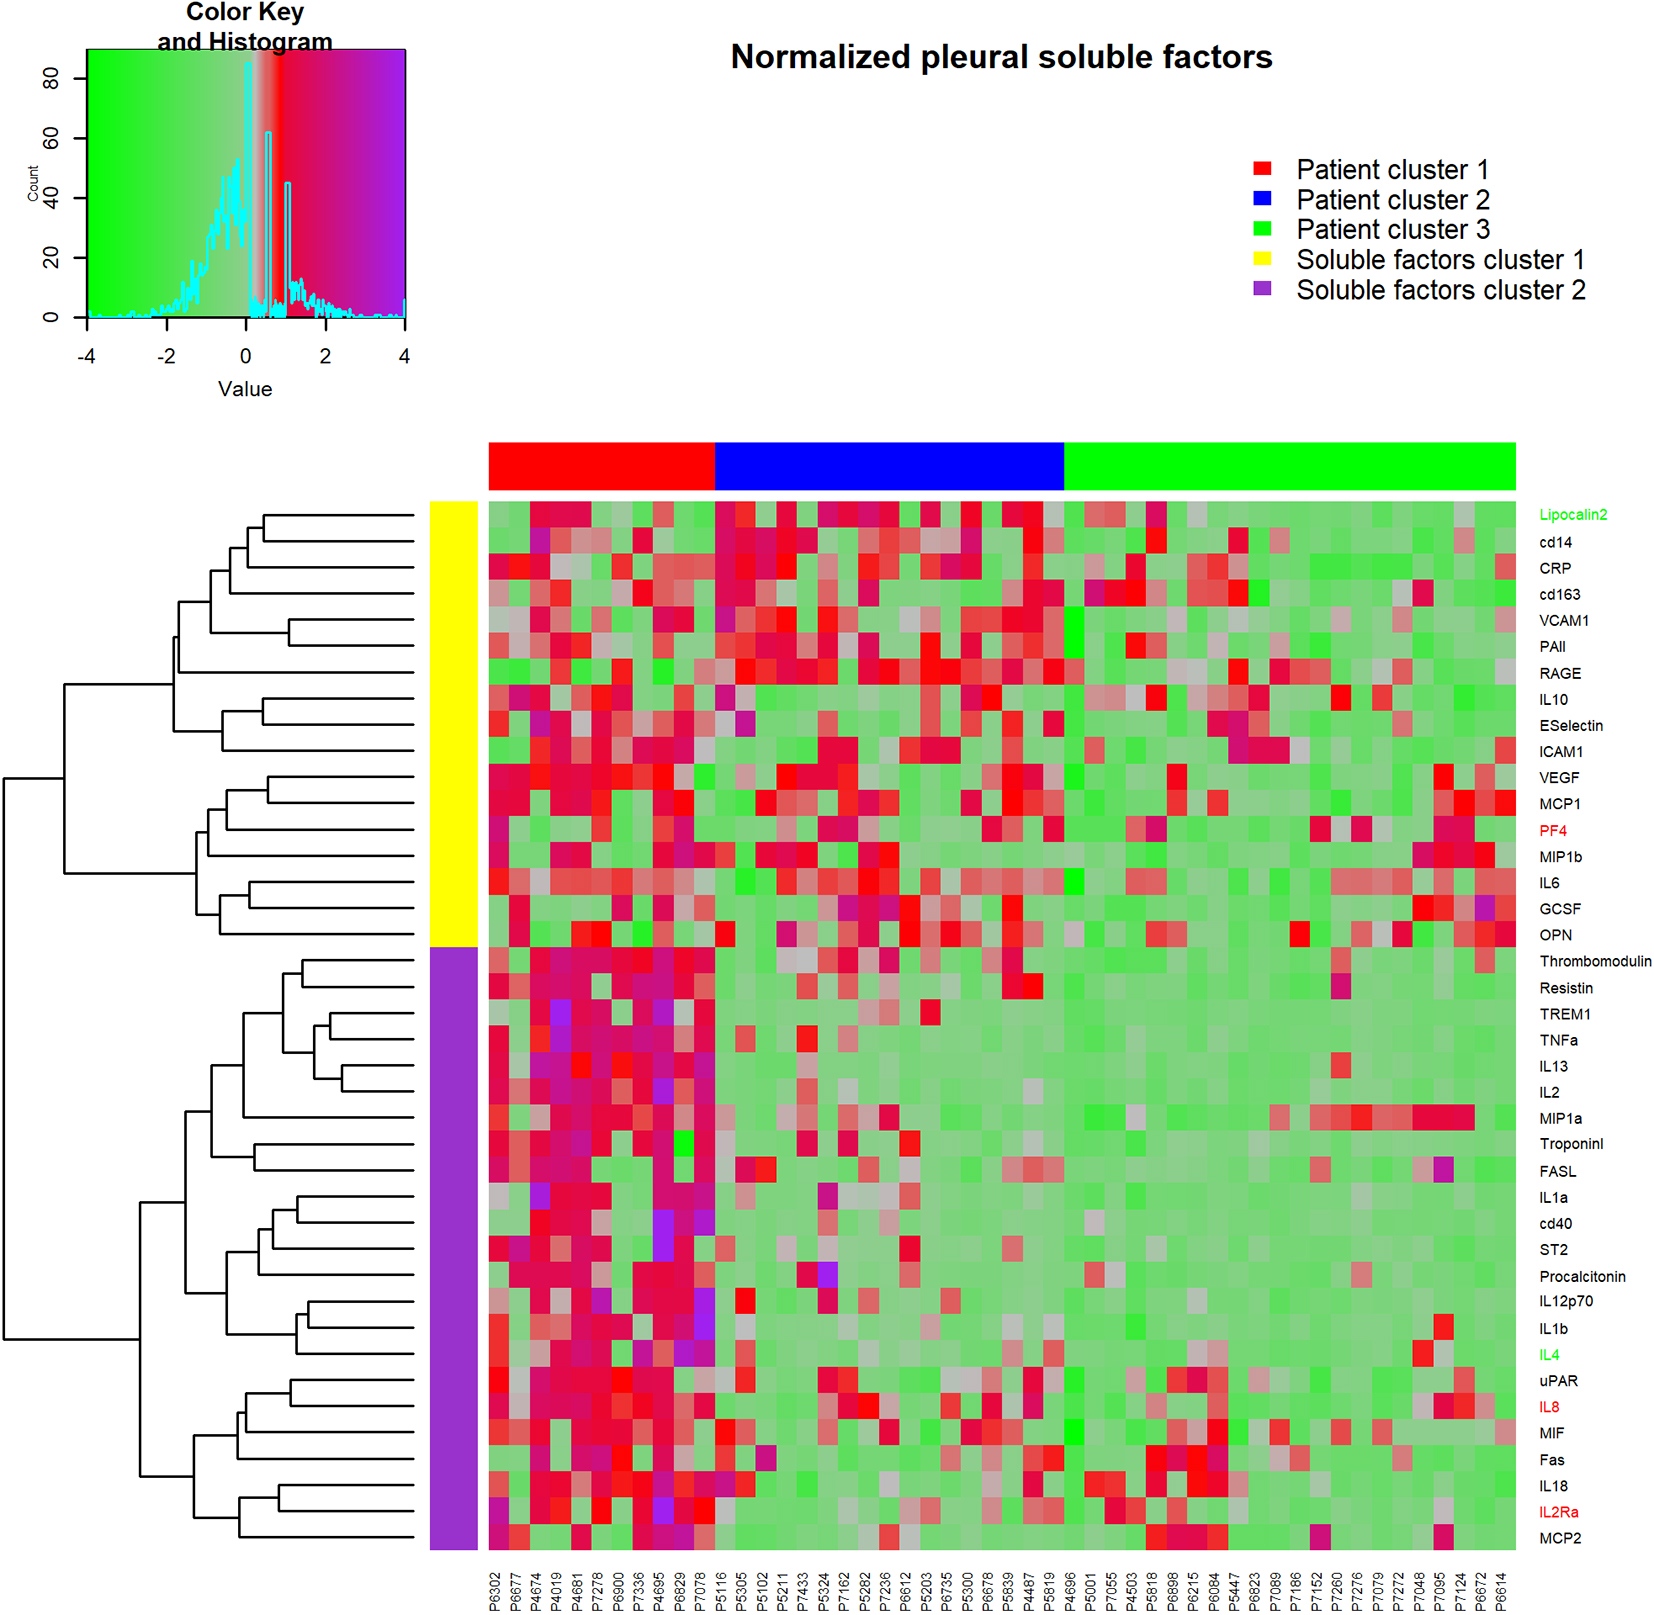 Heatmap of cytokine, chemokines and soluble factor results, clustered into groups using hierarchical clustering. Rows are standard deviation normalized cytokine values, columns are individual pleural effusion samples. Red (negative) and green (positive) row labels indicate cytokines that were identified as being independently associated with prognosis in multivariate Cox regression survival analysis.